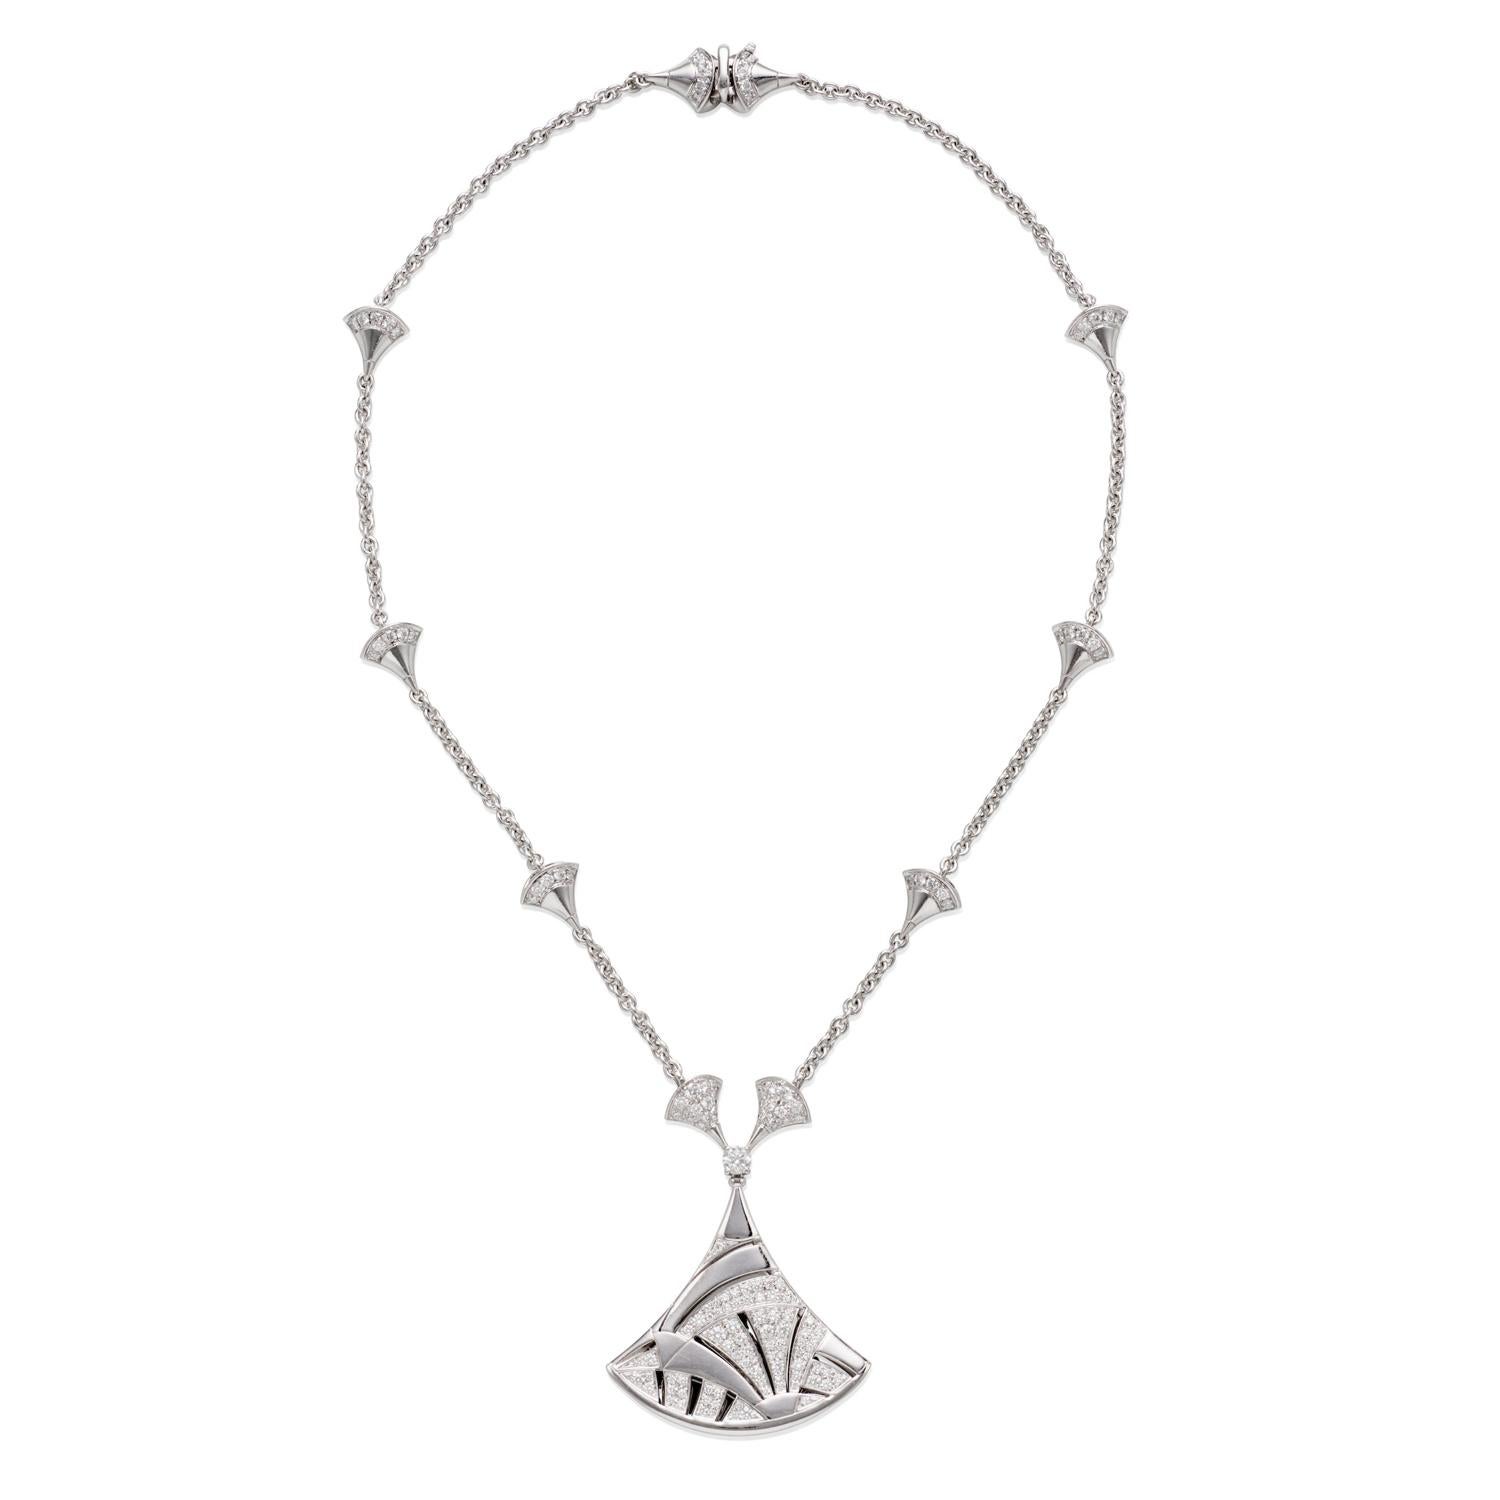 This fabulous Bvlgari necklace from the classic Diva's Dream collection features a mosaic fan pendant and chain crafted in 18k white gold and set with 174 round brilliant E-F-G VVS1-VVS2 diamonds weighing an estimated 4.35 carats.  Signed Bvlgari,